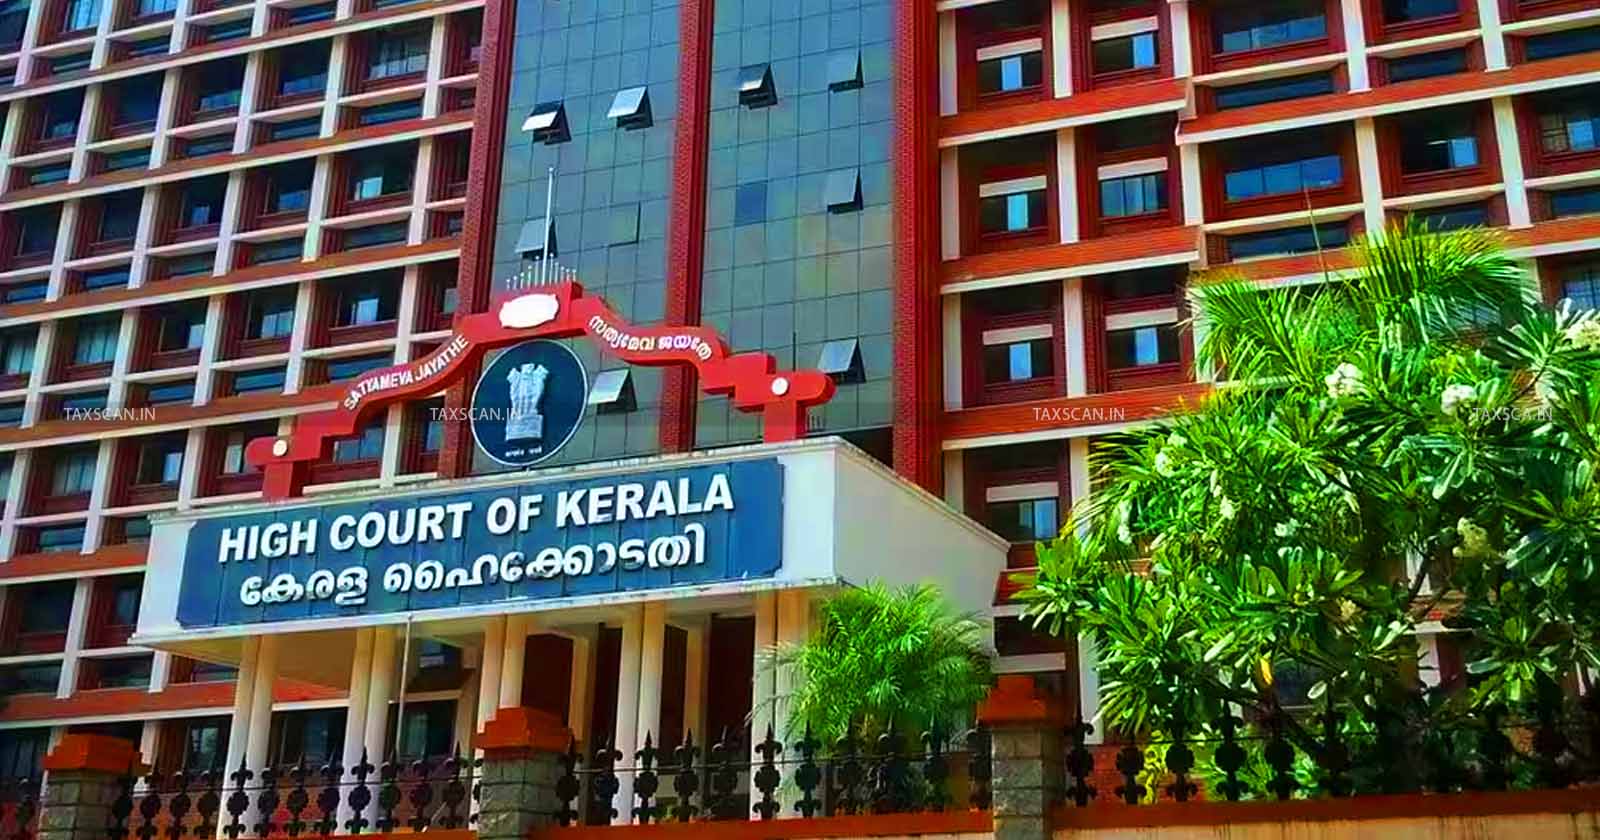 Non-compliance - Conditions in Stay Order-Kerala HC - Income Tax Commissioner -TAXSCAN